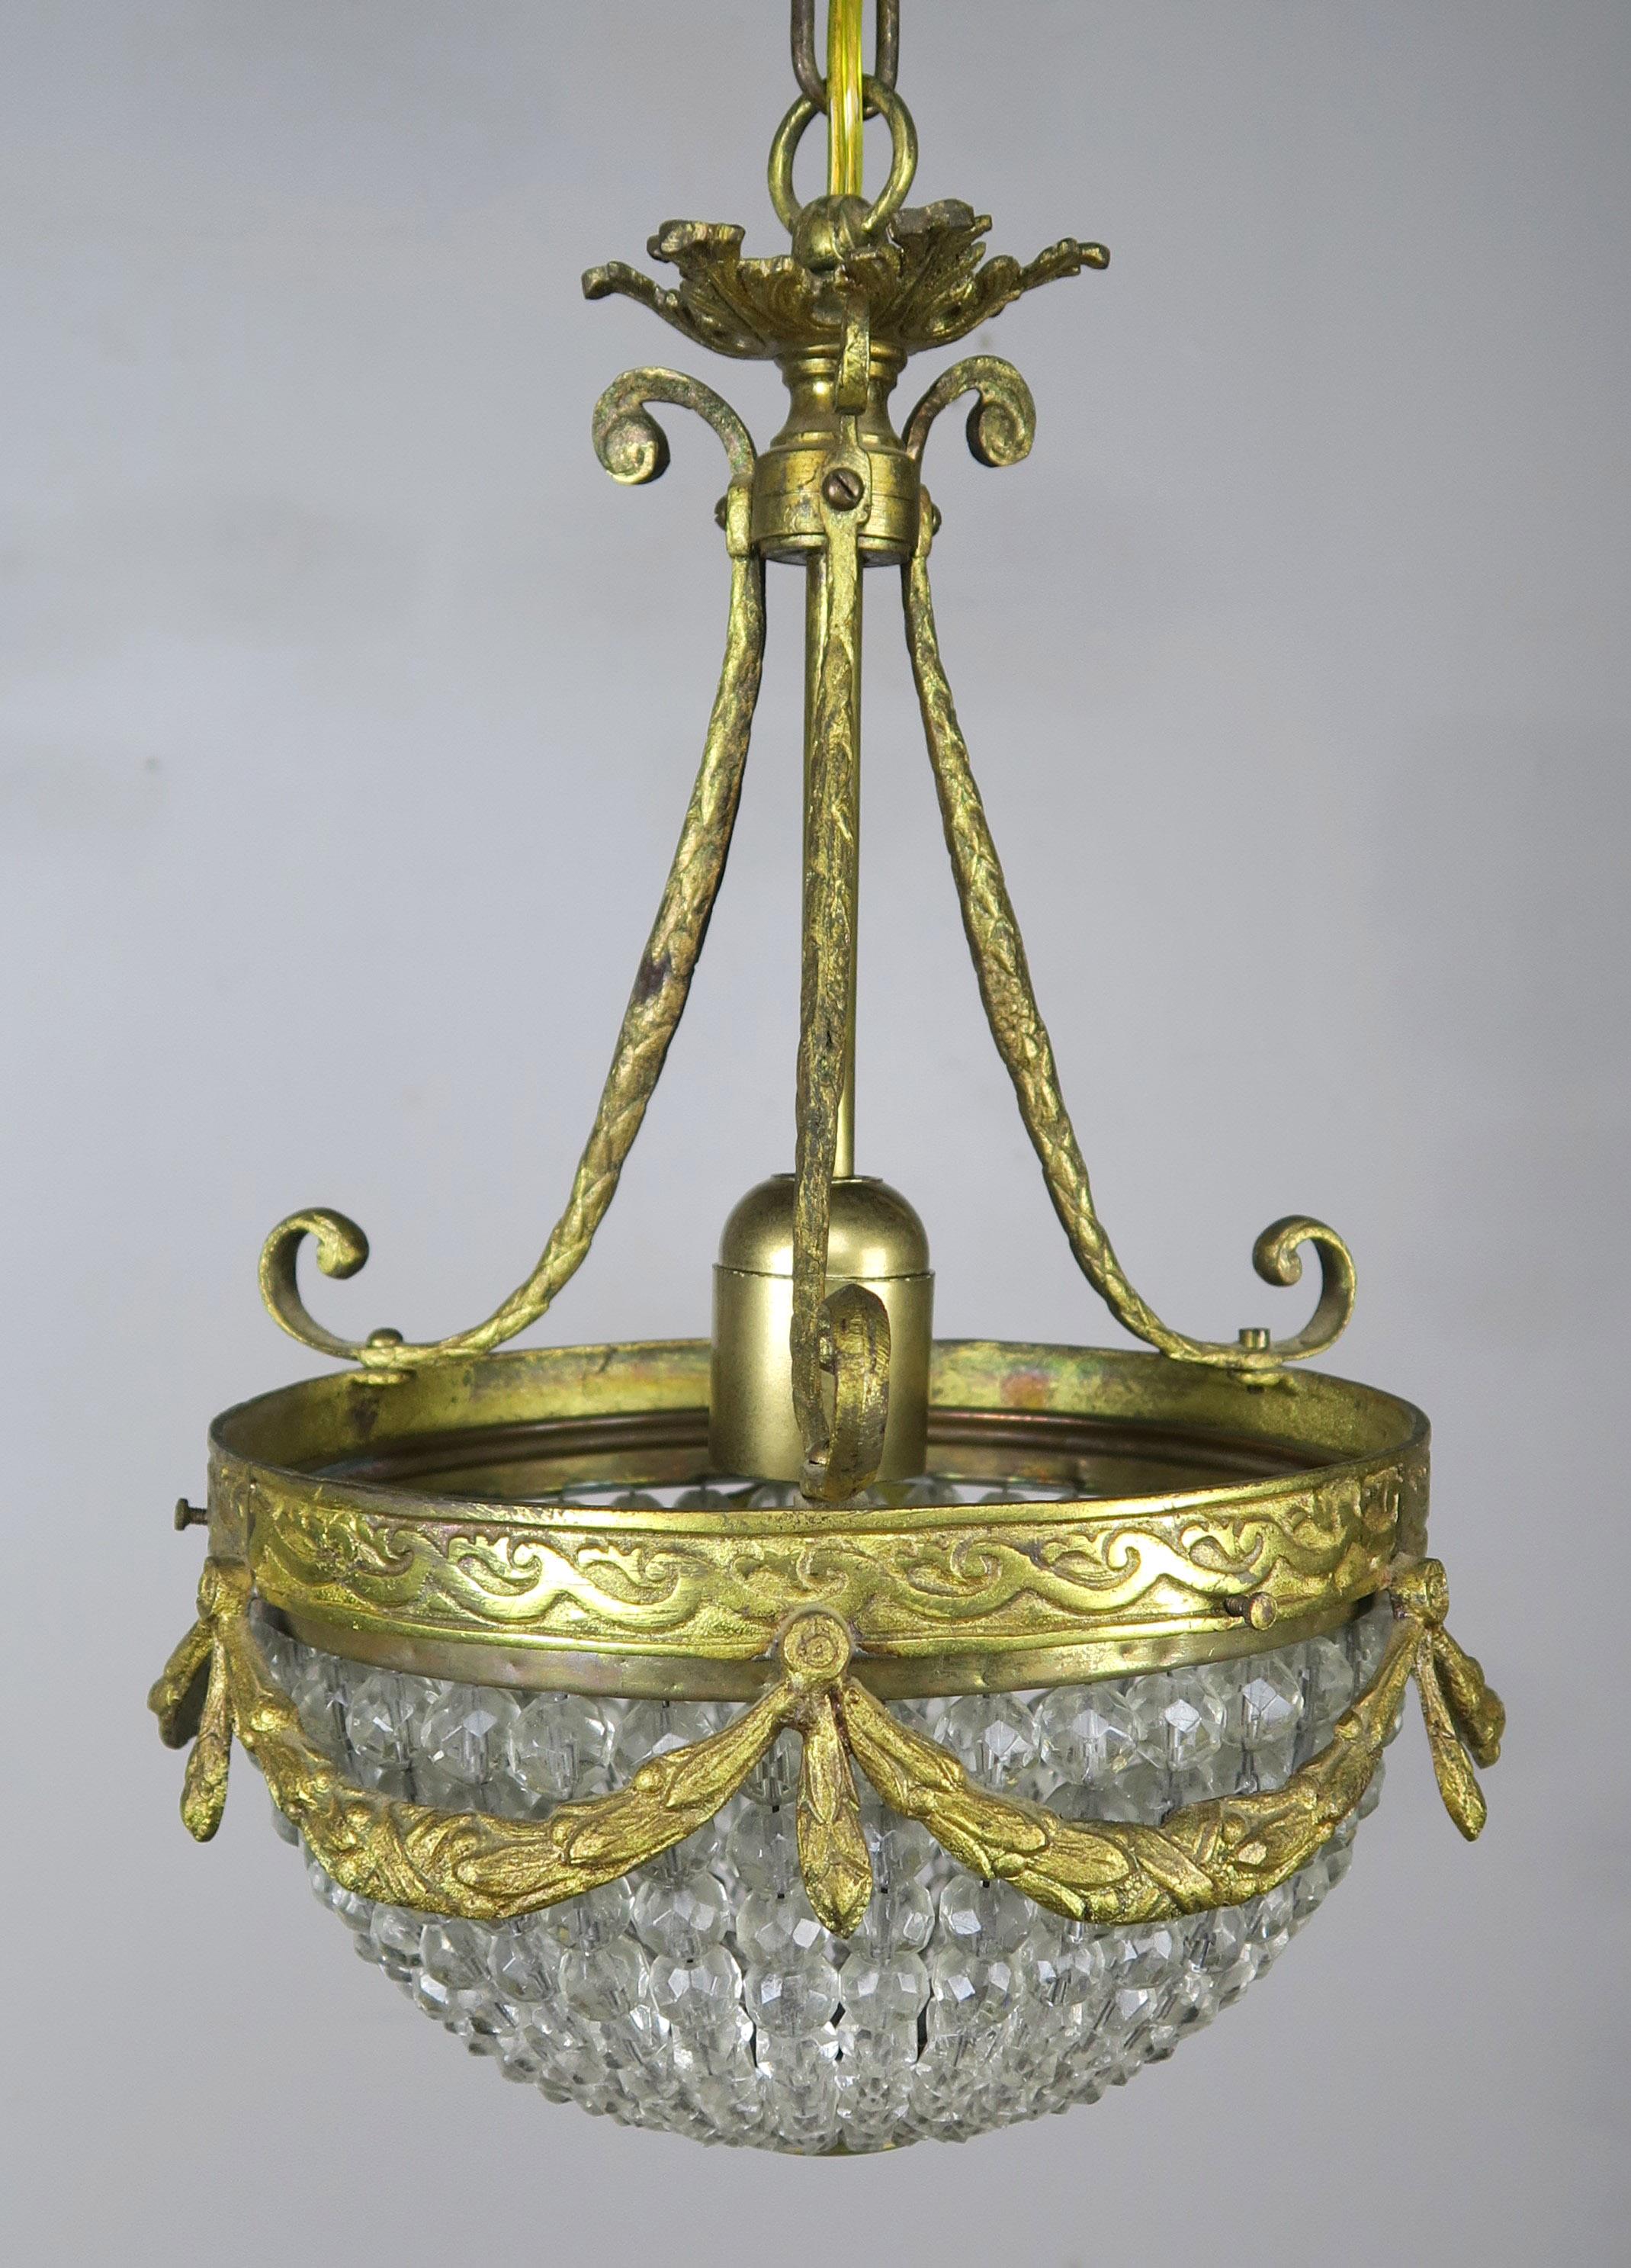 French bronze and beaded ceiling fixture with bronze garlands swaging around the perimeter of the beading. The fixture is newly rewired and includes chain and canopy.